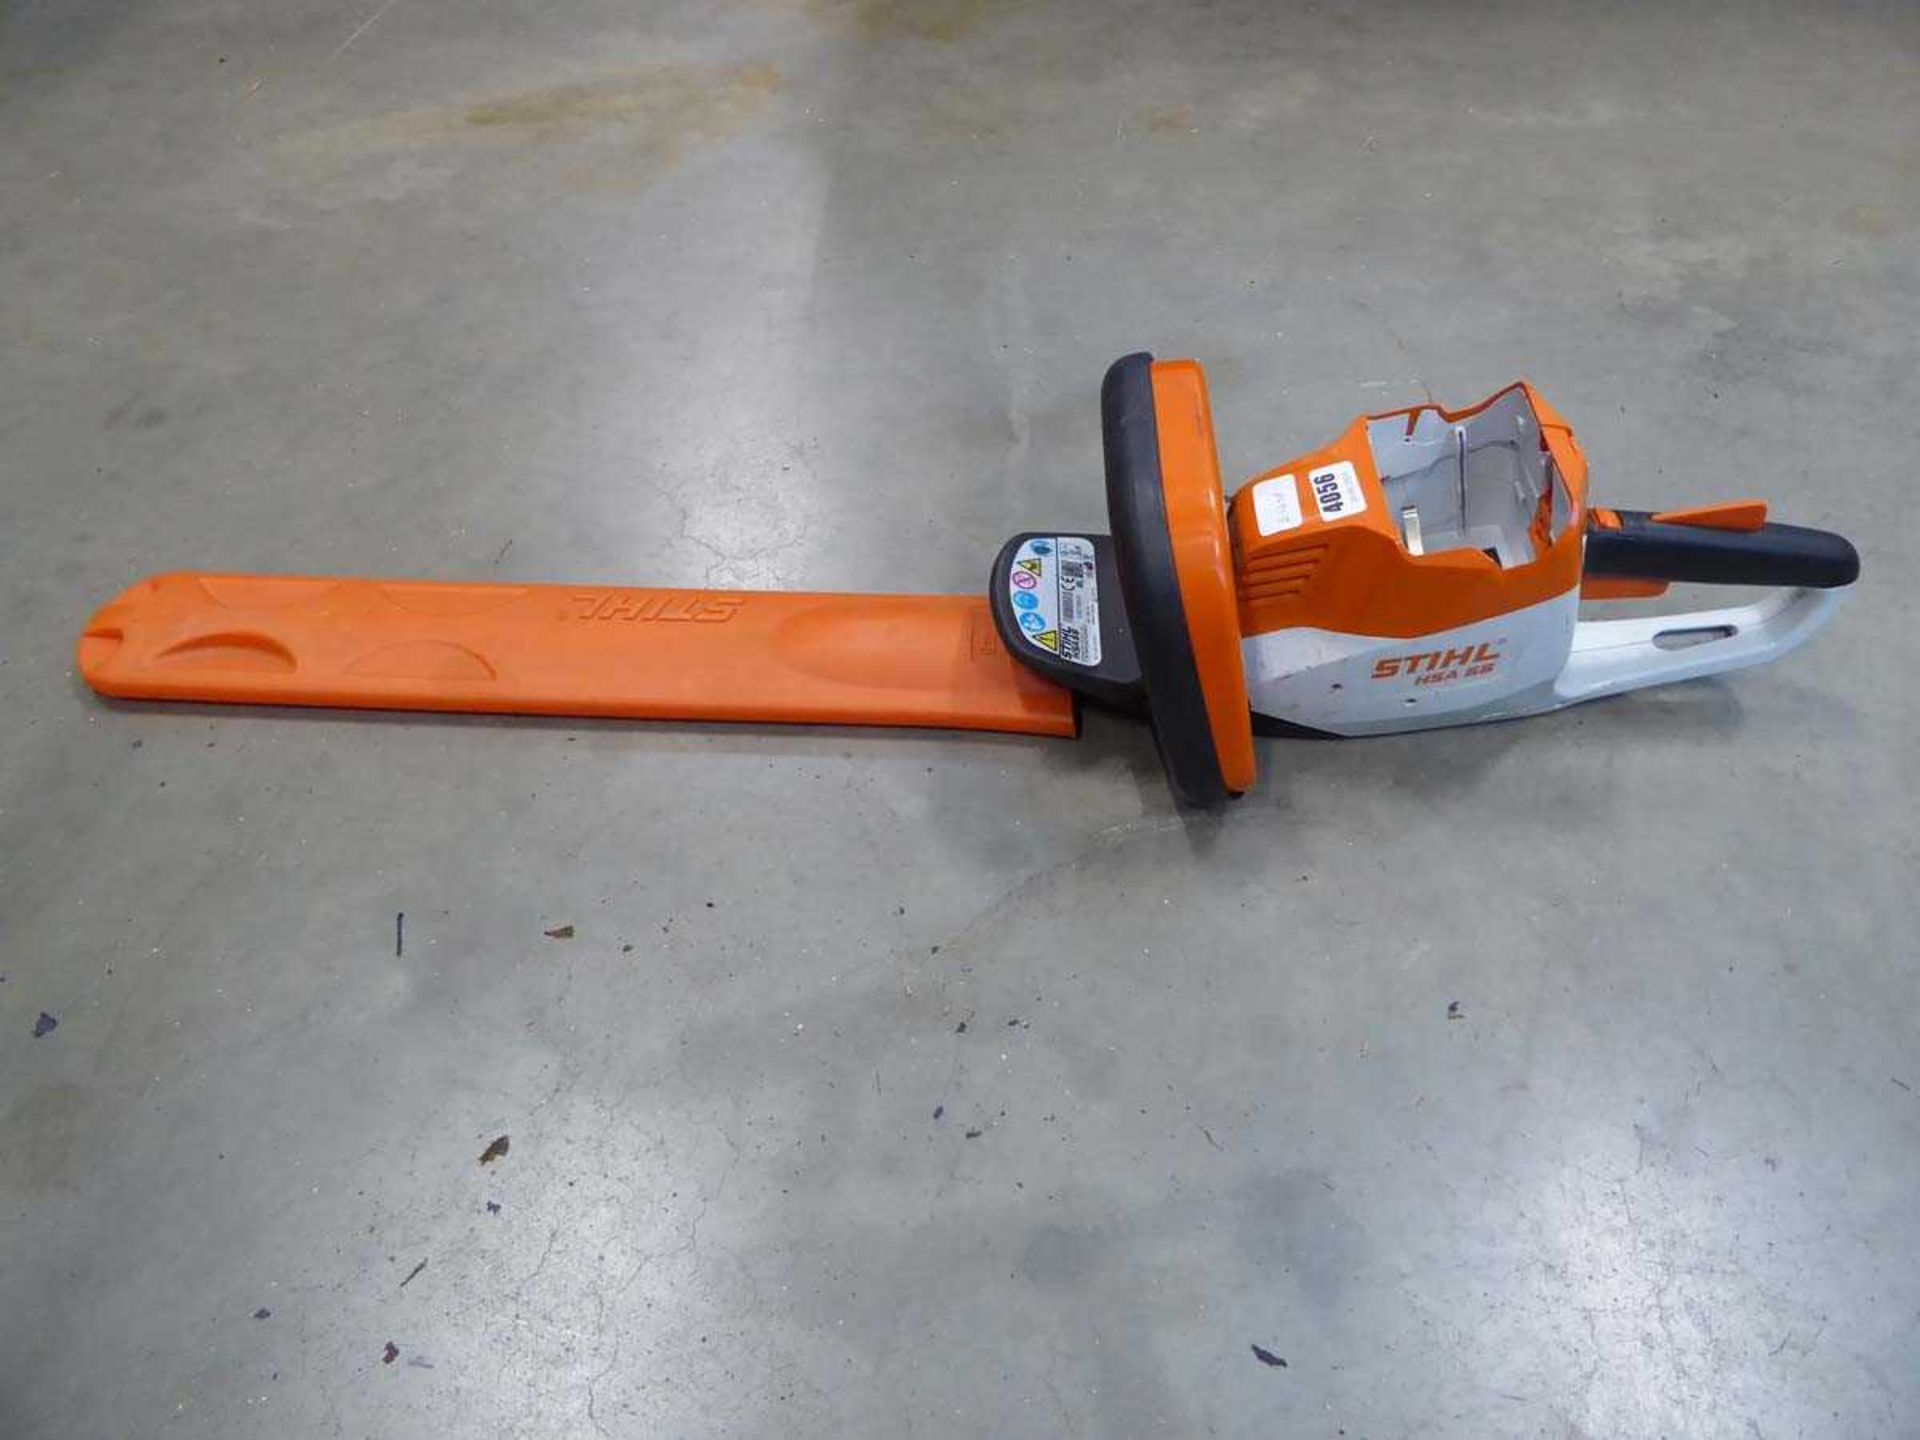 Stihl HSA 56 battery powered hedge cutter, no battery and no charger